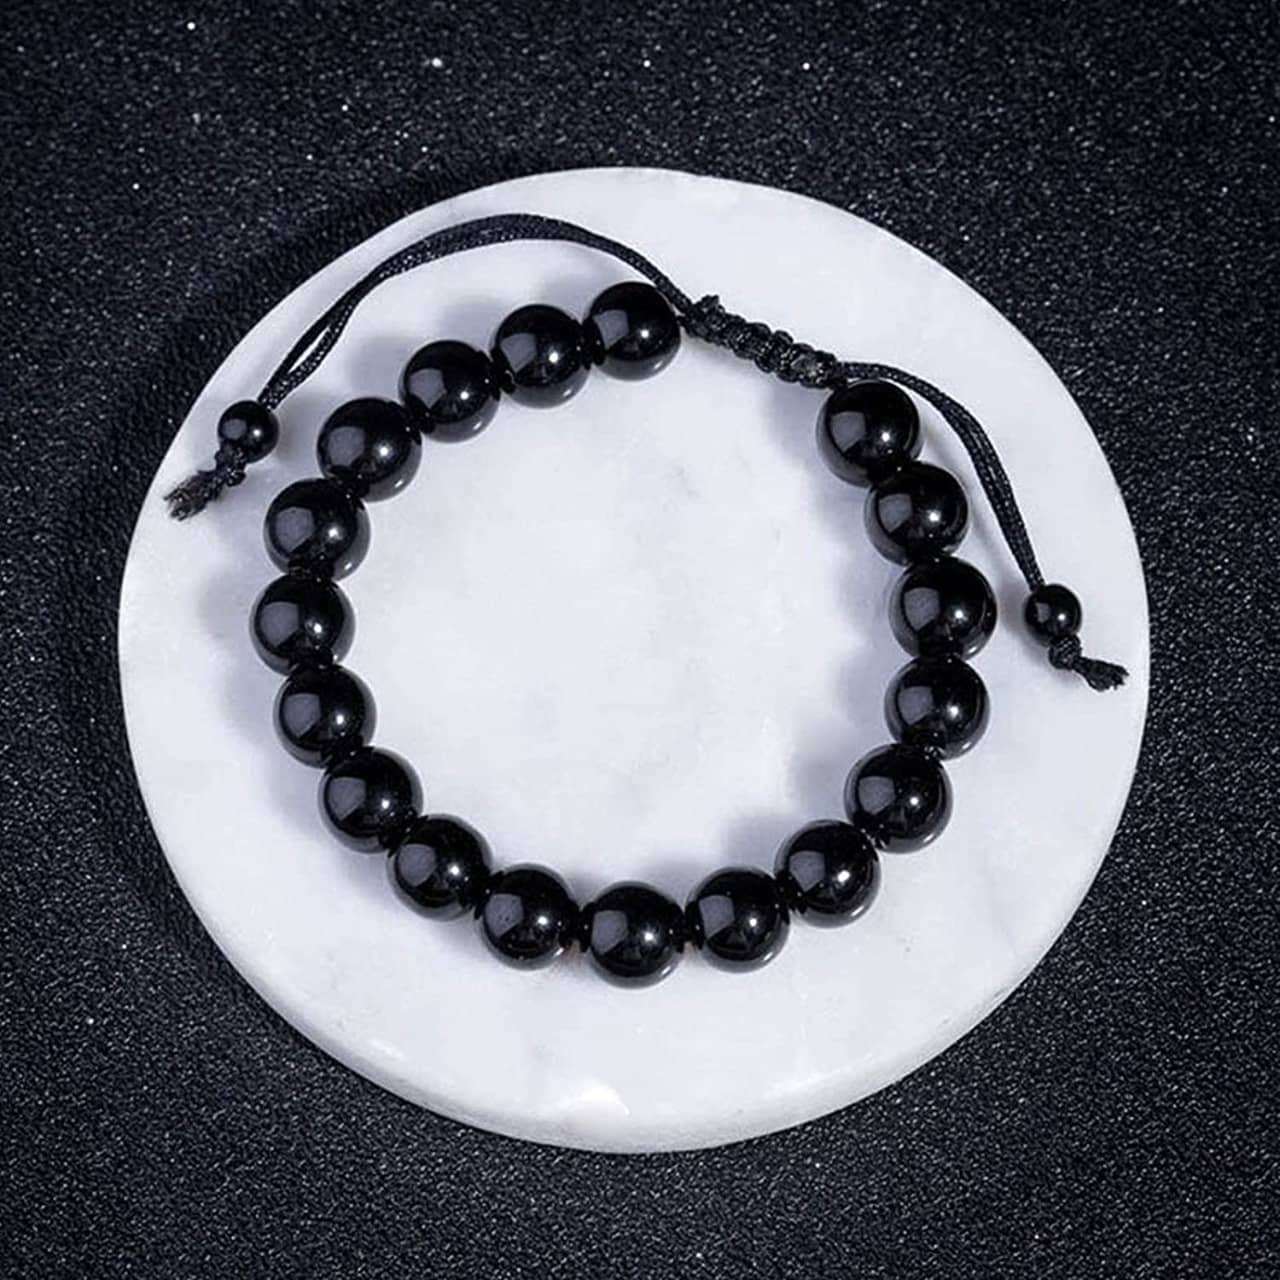 Amazon.com: Black Obsidian Bracelet,Feng Shui Black Obsidian Wealth Bracelet  for Women Men Couples Handmade Stretch Obsidian Bracelet Bangle with Carved  Pixiu Tiger Eye Stone Attract Wealth Money and Good Luck: Clothing, Shoes